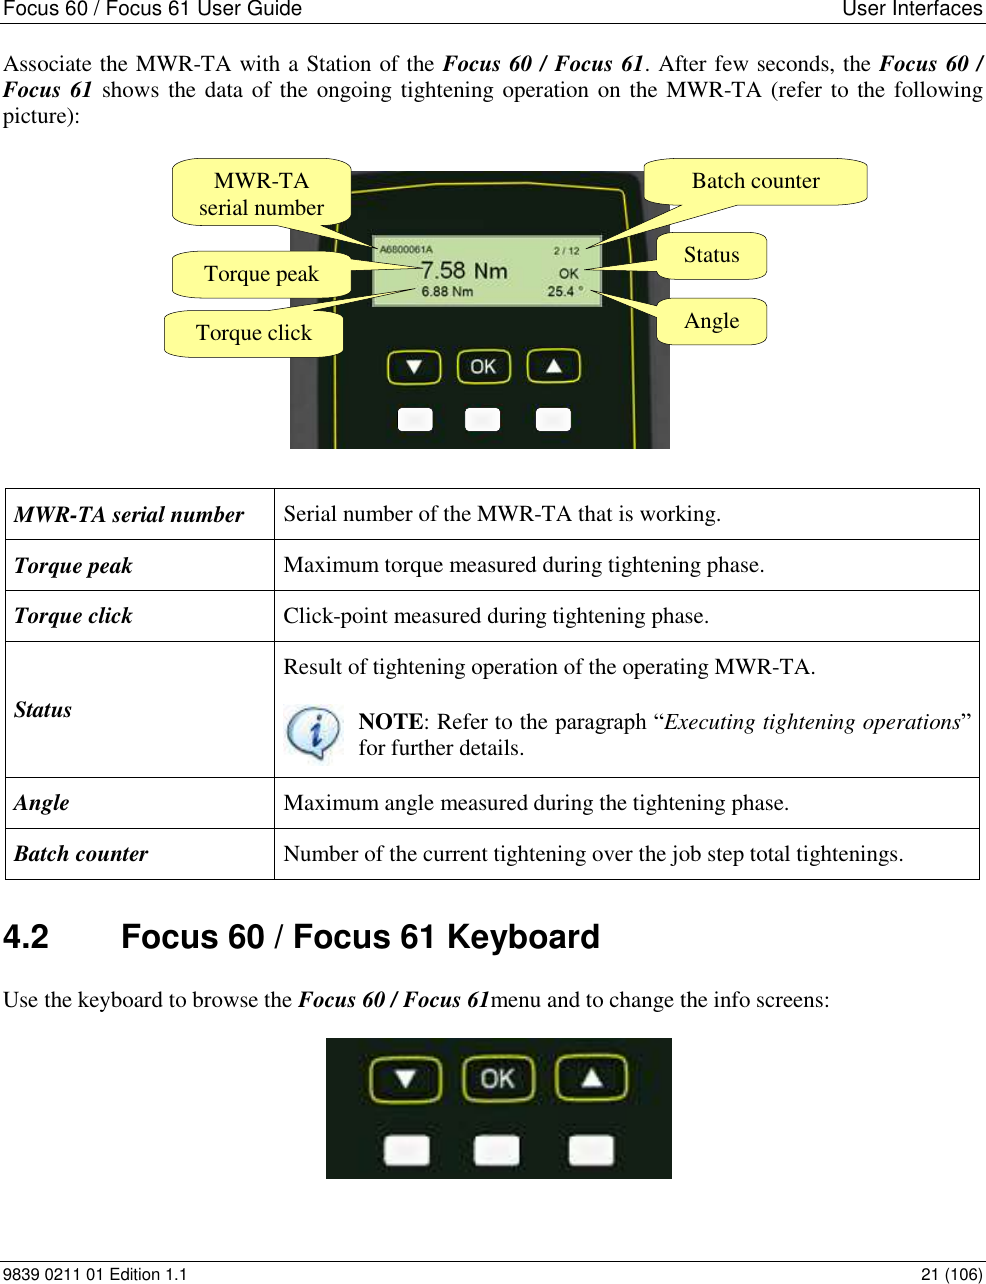 Focus 60 / Focus 61 User Guide  User Interfaces 9839 0211 01 Edition 1.1    21 (106) Associate the MWR-TA with a Station of the Focus 60 / Focus 61. After few seconds, the Focus 60 / Focus 61 shows the data of the ongoing tightening operation on the MWR-TA (refer to the following picture):  MWR-TA serial number Serial number of the MWR-TA that is working.  Torque peak Maximum torque measured during tightening phase. Torque click Click-point measured during tightening phase.  Status  Result of tightening operation of the operating MWR-TA.   NOTE: Refer to the paragraph “Executing tightening operations” for further details. Angle Maximum angle measured during the tightening phase.  Batch counter Number of the current tightening over the job step total tightenings. 4.2  Focus 60 / Focus 61 Keyboard Use the keyboard to browse the Focus 60 / Focus 61menu and to change the info screens:  Torque peak Torque click Angle Status Batch counter MWR-TA serial number 